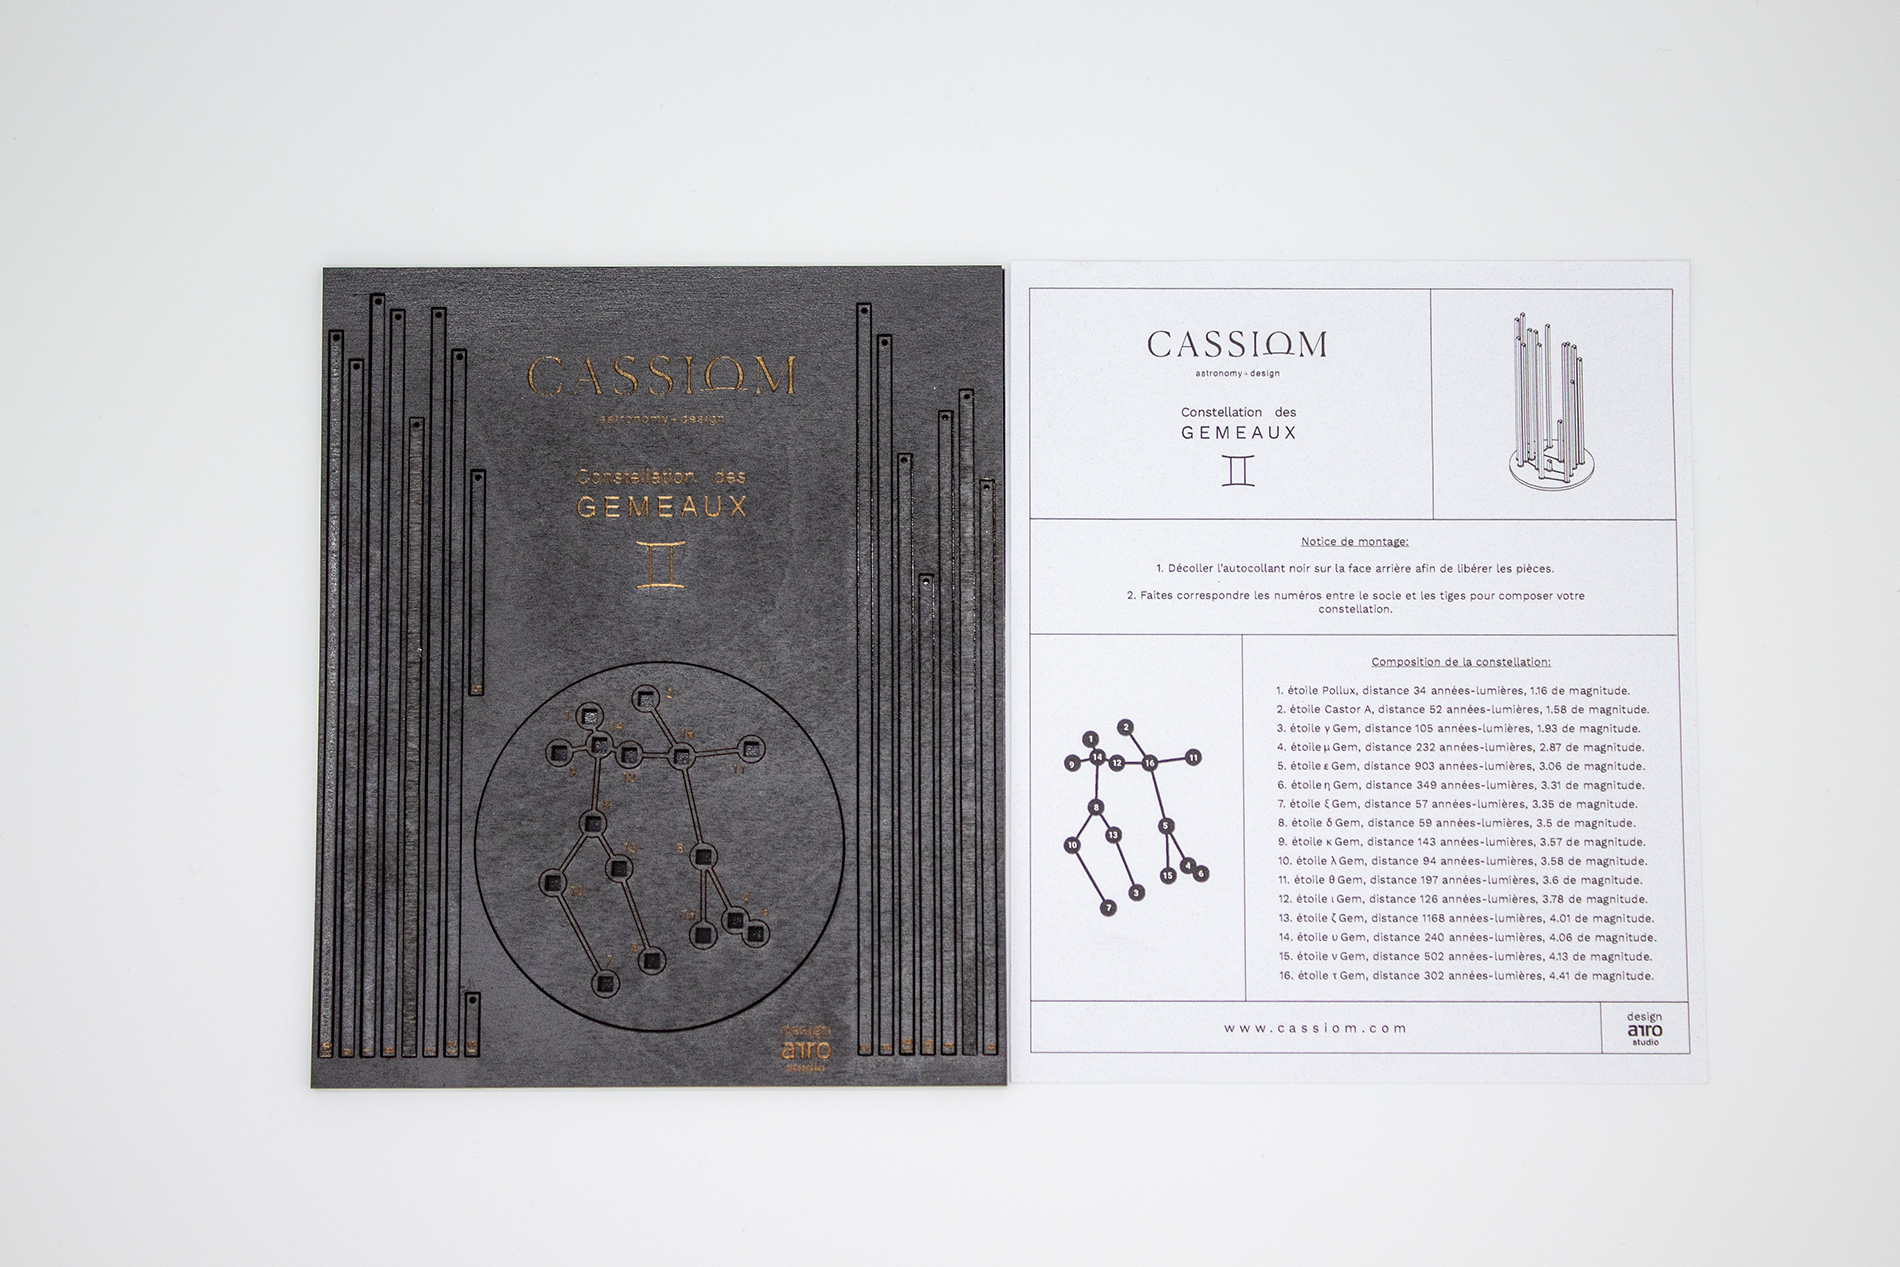 DATA STRUCTURE CASSIOM, sculpture inspired by the constellations of the zodiac by Ludovic Roth